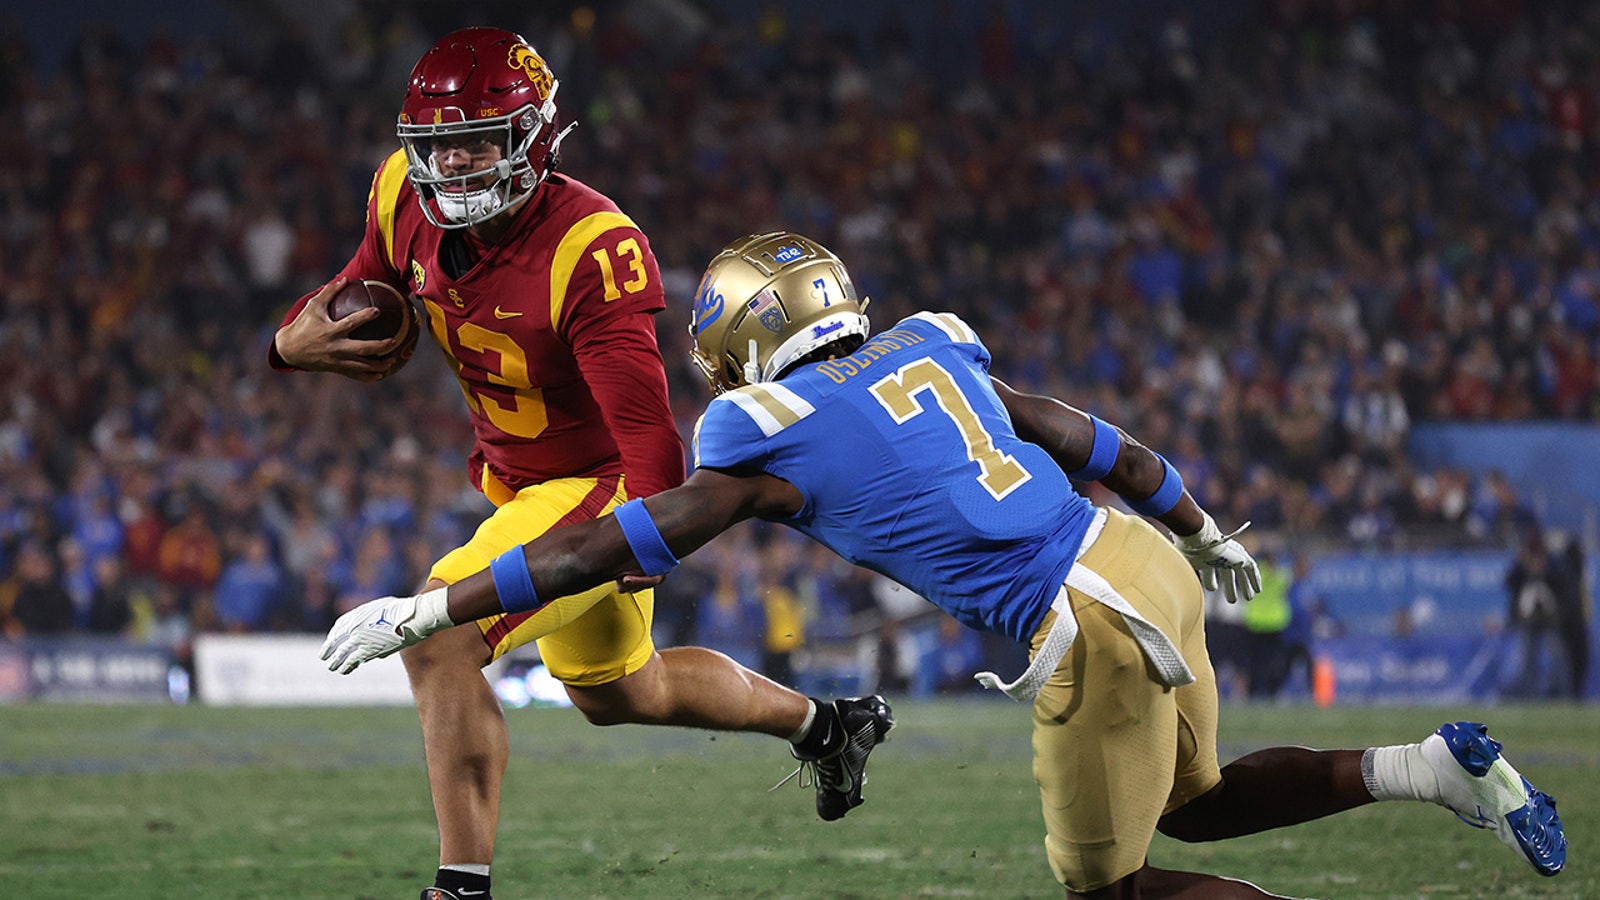 UCLA falls to USC in rivalry game